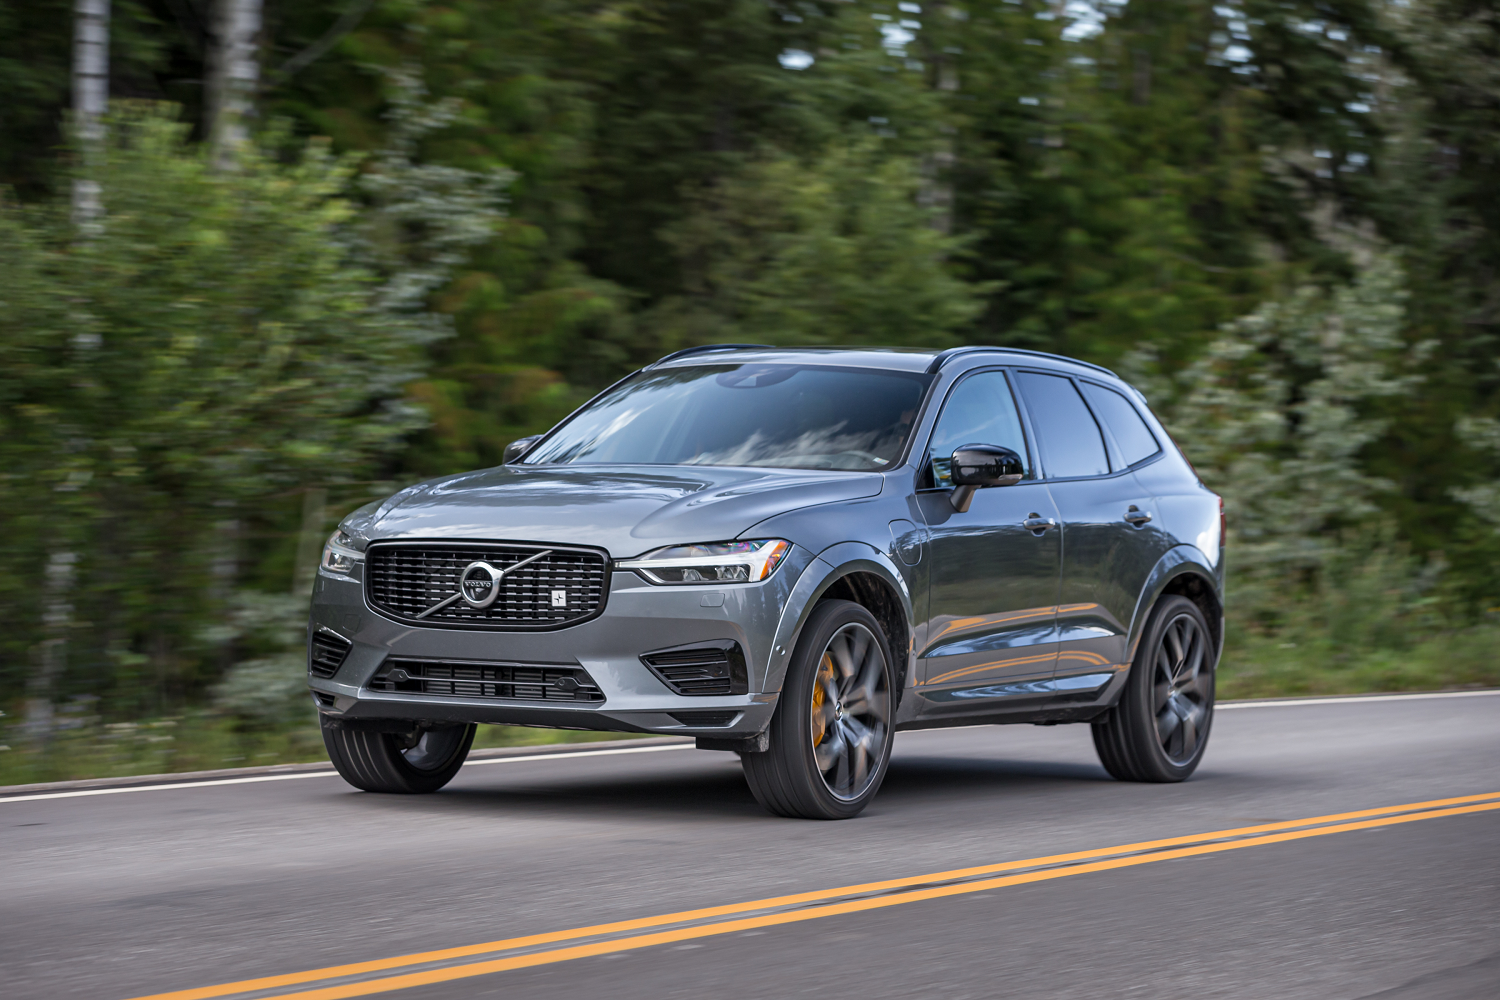 Lease a Volvo in Eugene, OR